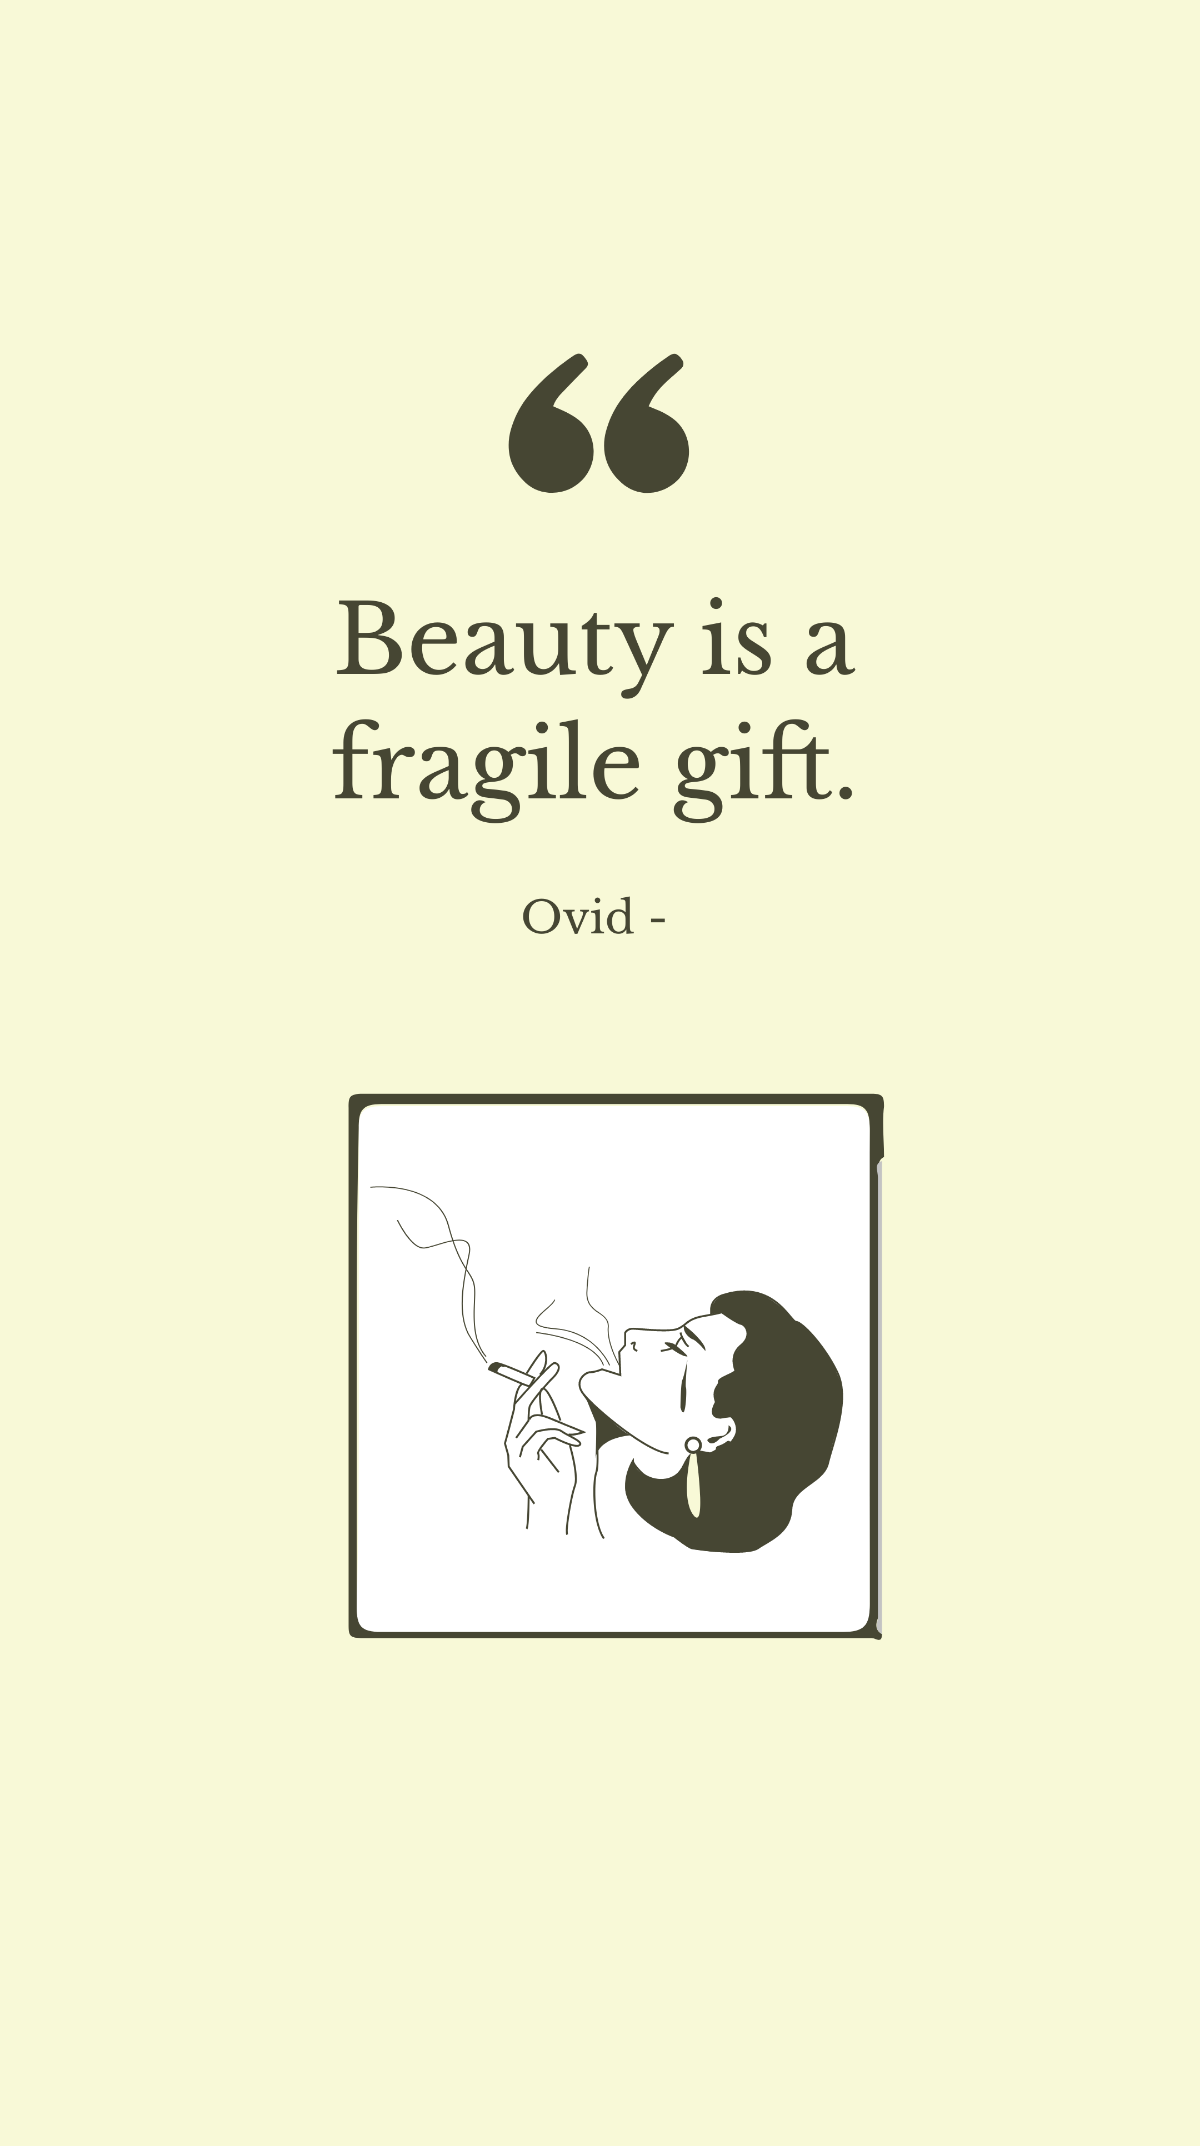 Ovid - Beauty is a fragile gift. Template